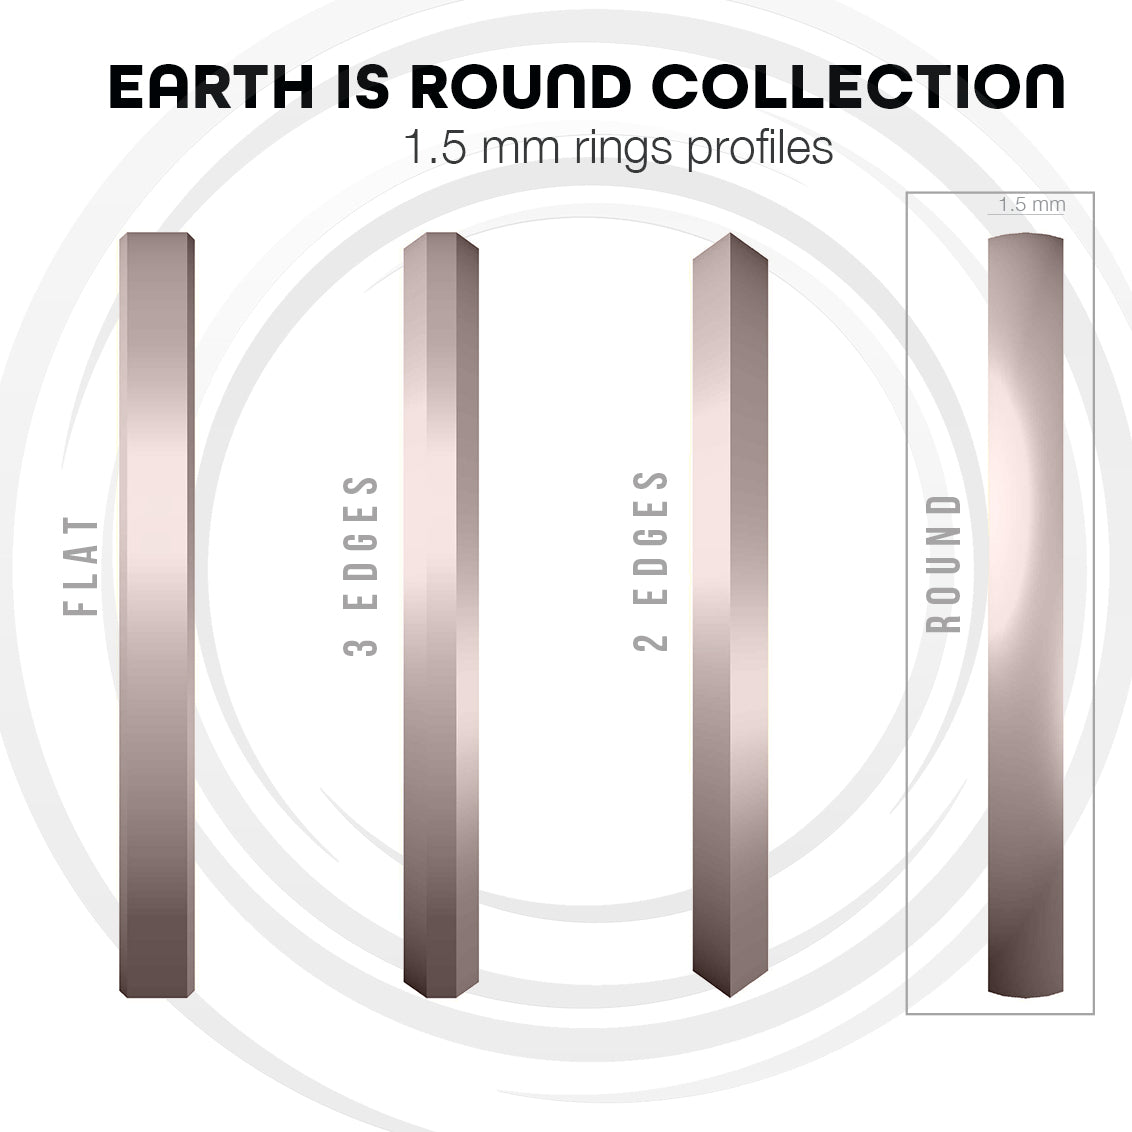 Bague EARTH IS ROUND 1,5mm profil rond or rouge 18k